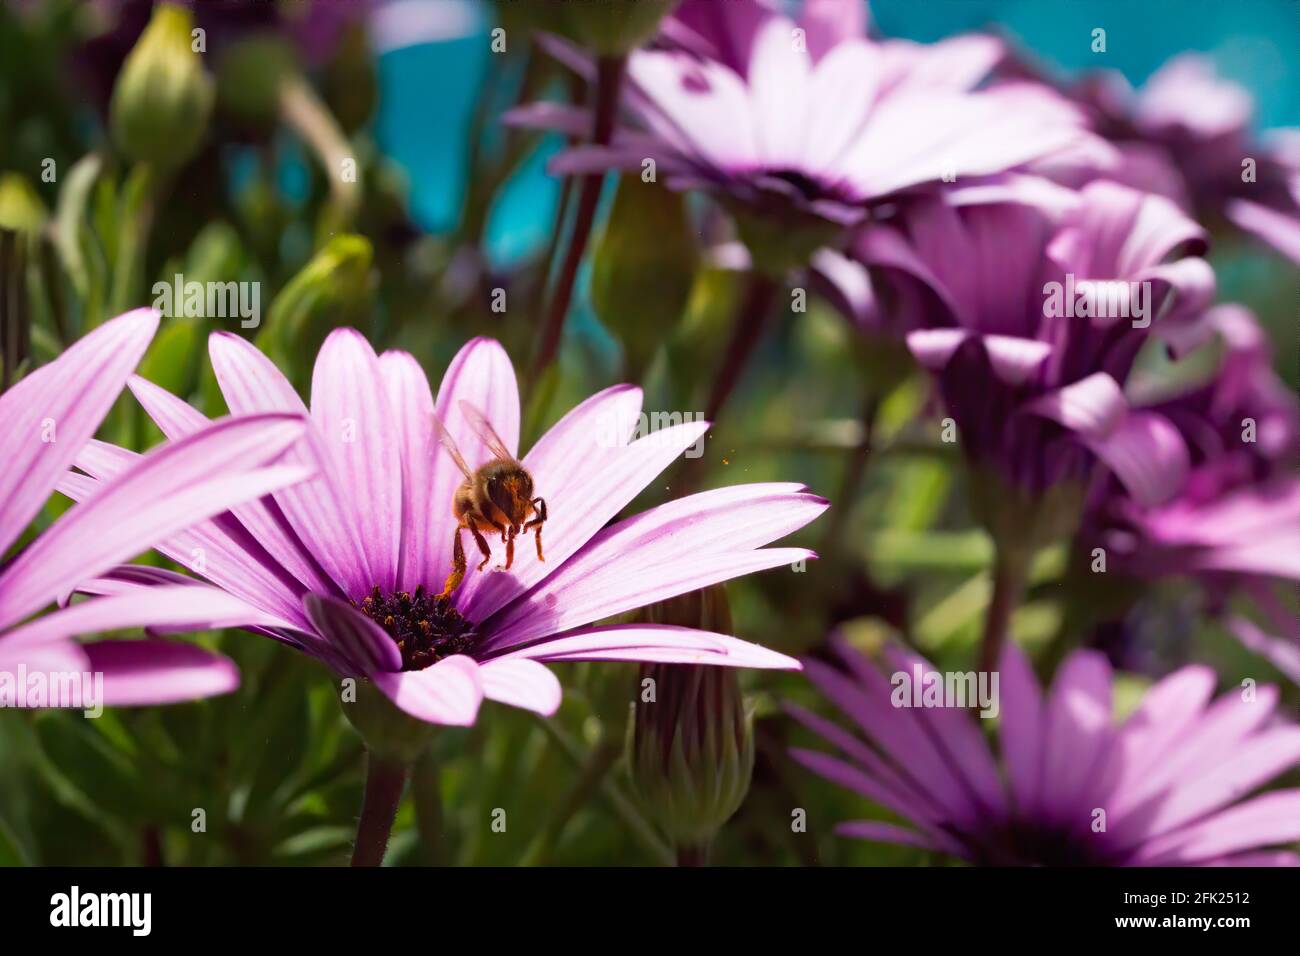 One bee takes off from a purple osteospermum flower and is loaded with pollen. A blue swimming pool at the background Stock Photo